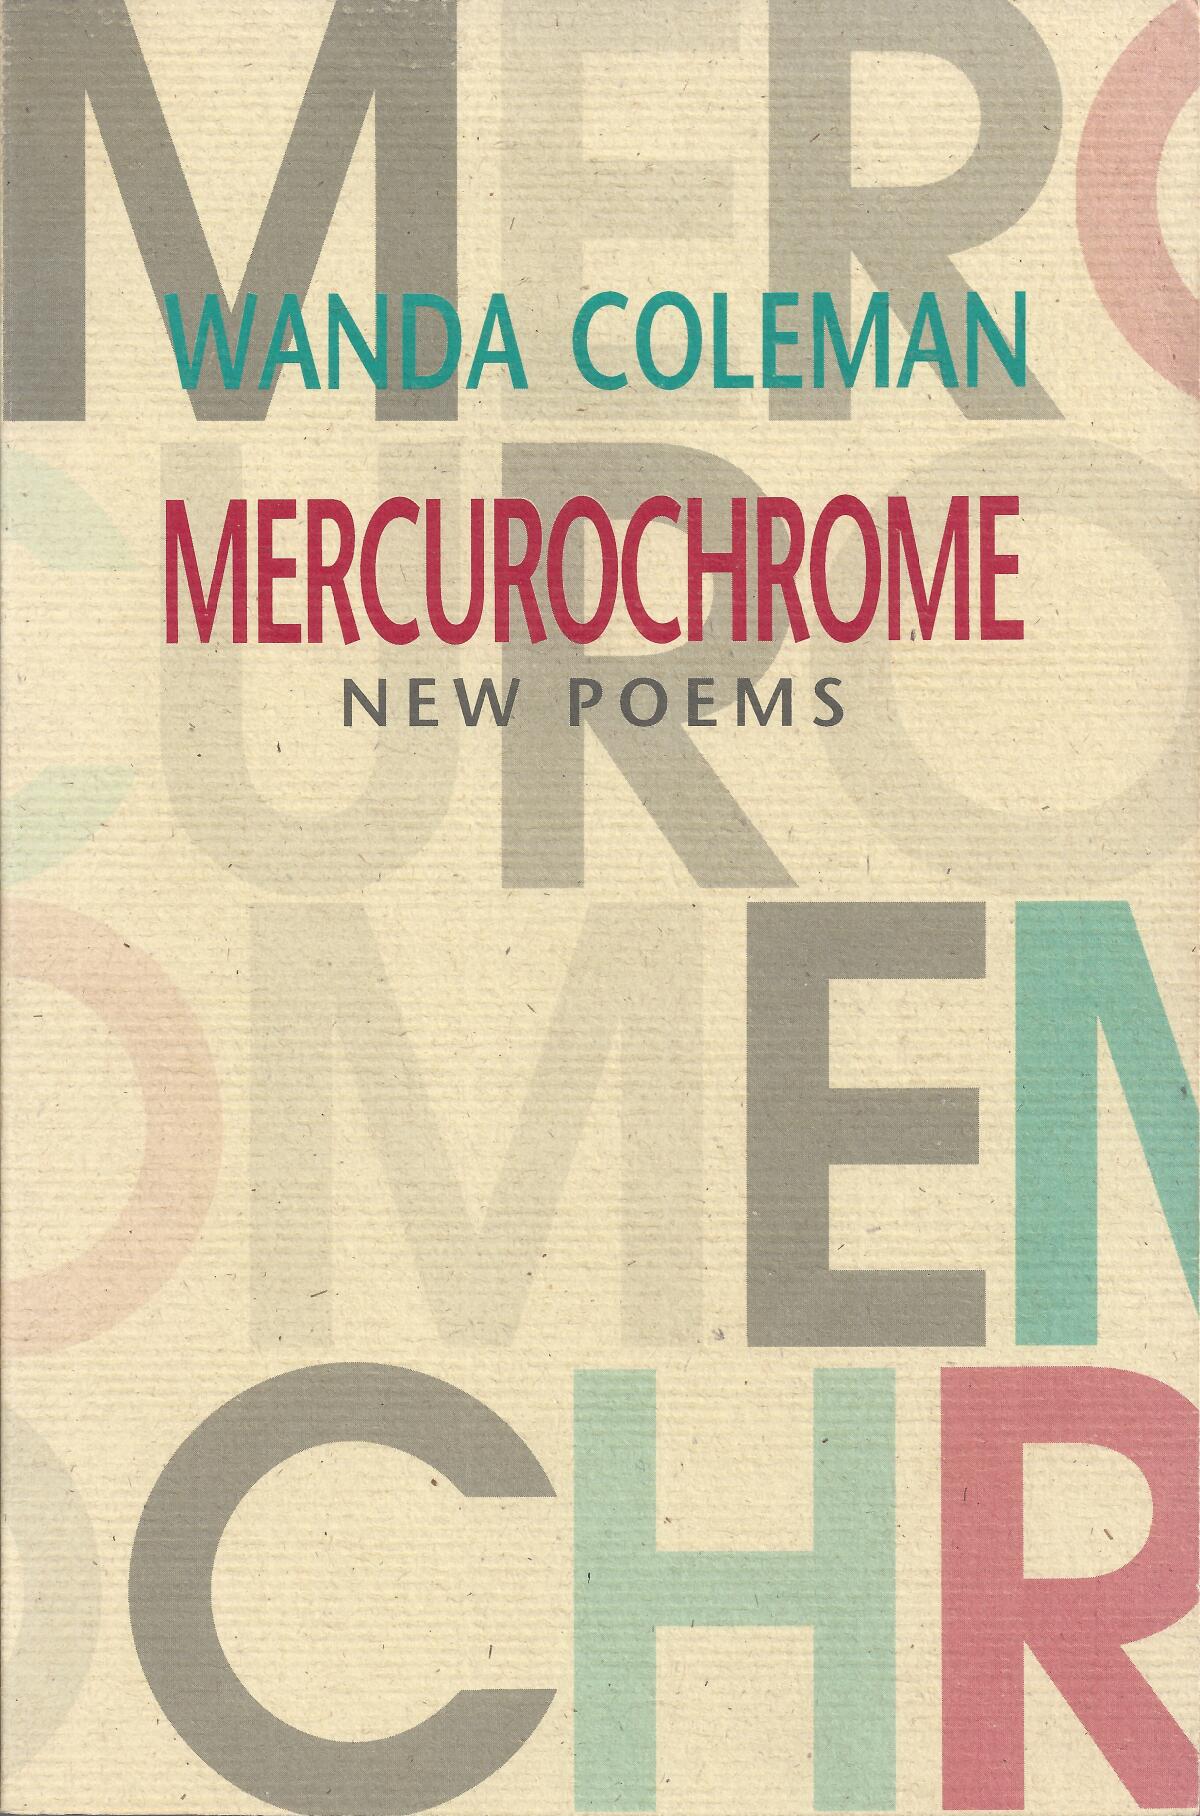 "Mecurochrome: New Poems" by Wanda Coleman